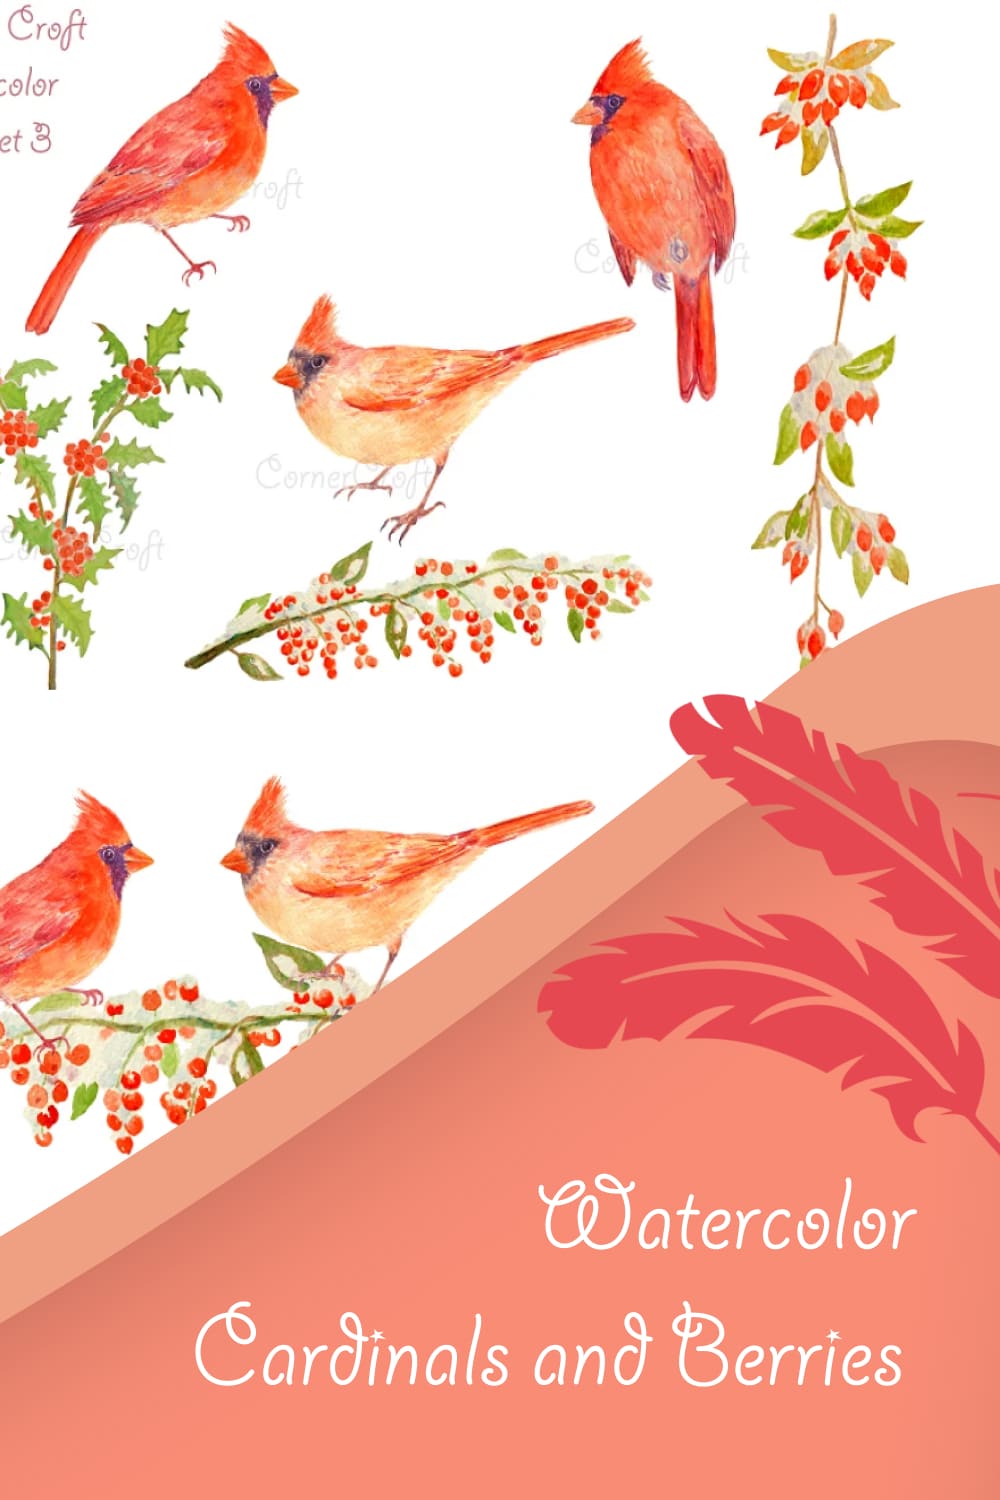 watercolor cardinals and berries1000x1500